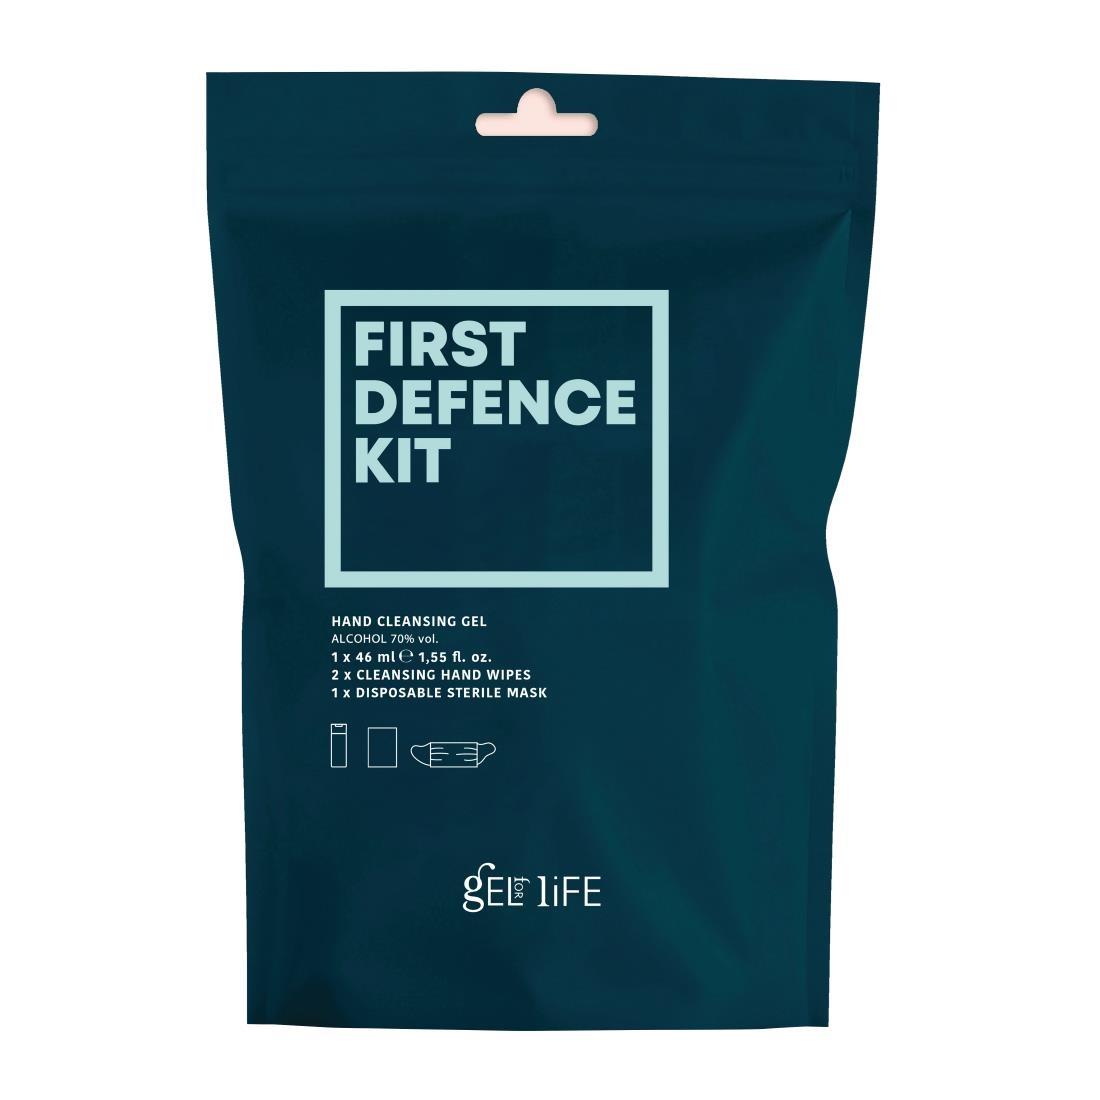 GFL PPE Personal First Defence Kits (Pack of 24) - DF638  - 1